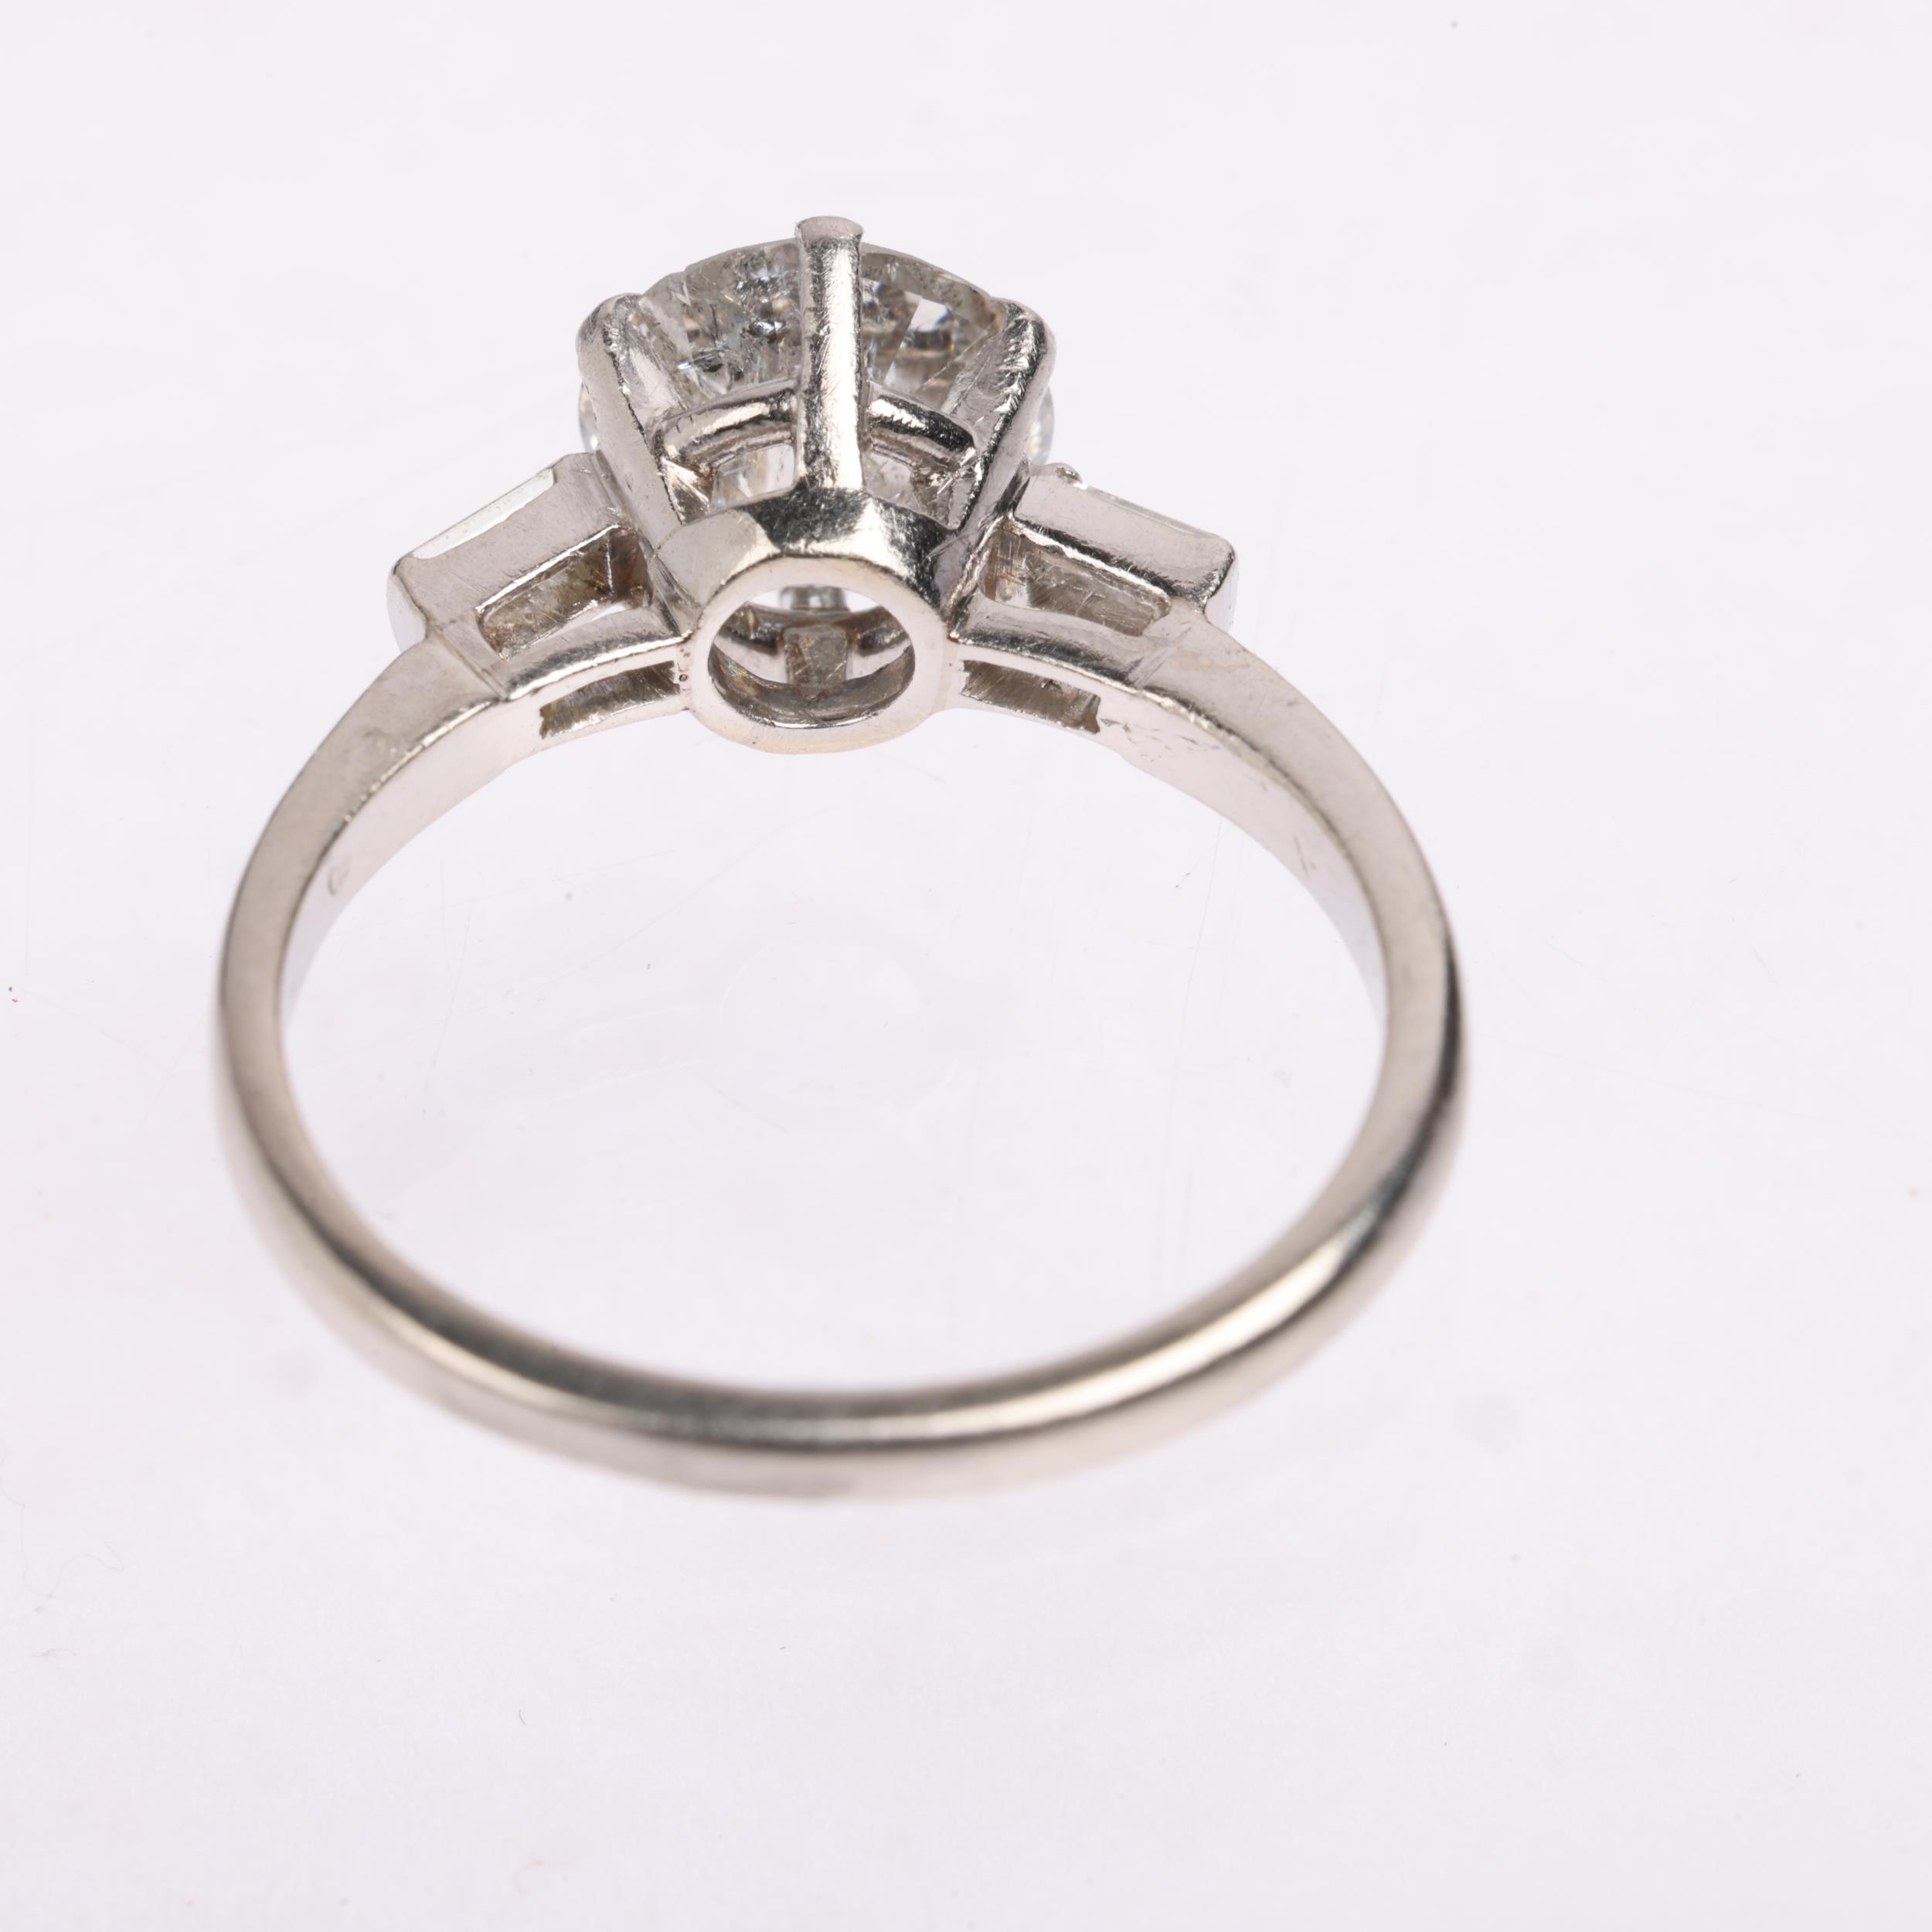 A 1.7ct solitaire diamond ring, centrally claw set with 1.7ct modern round brilliant-cut diamond, - Image 3 of 4